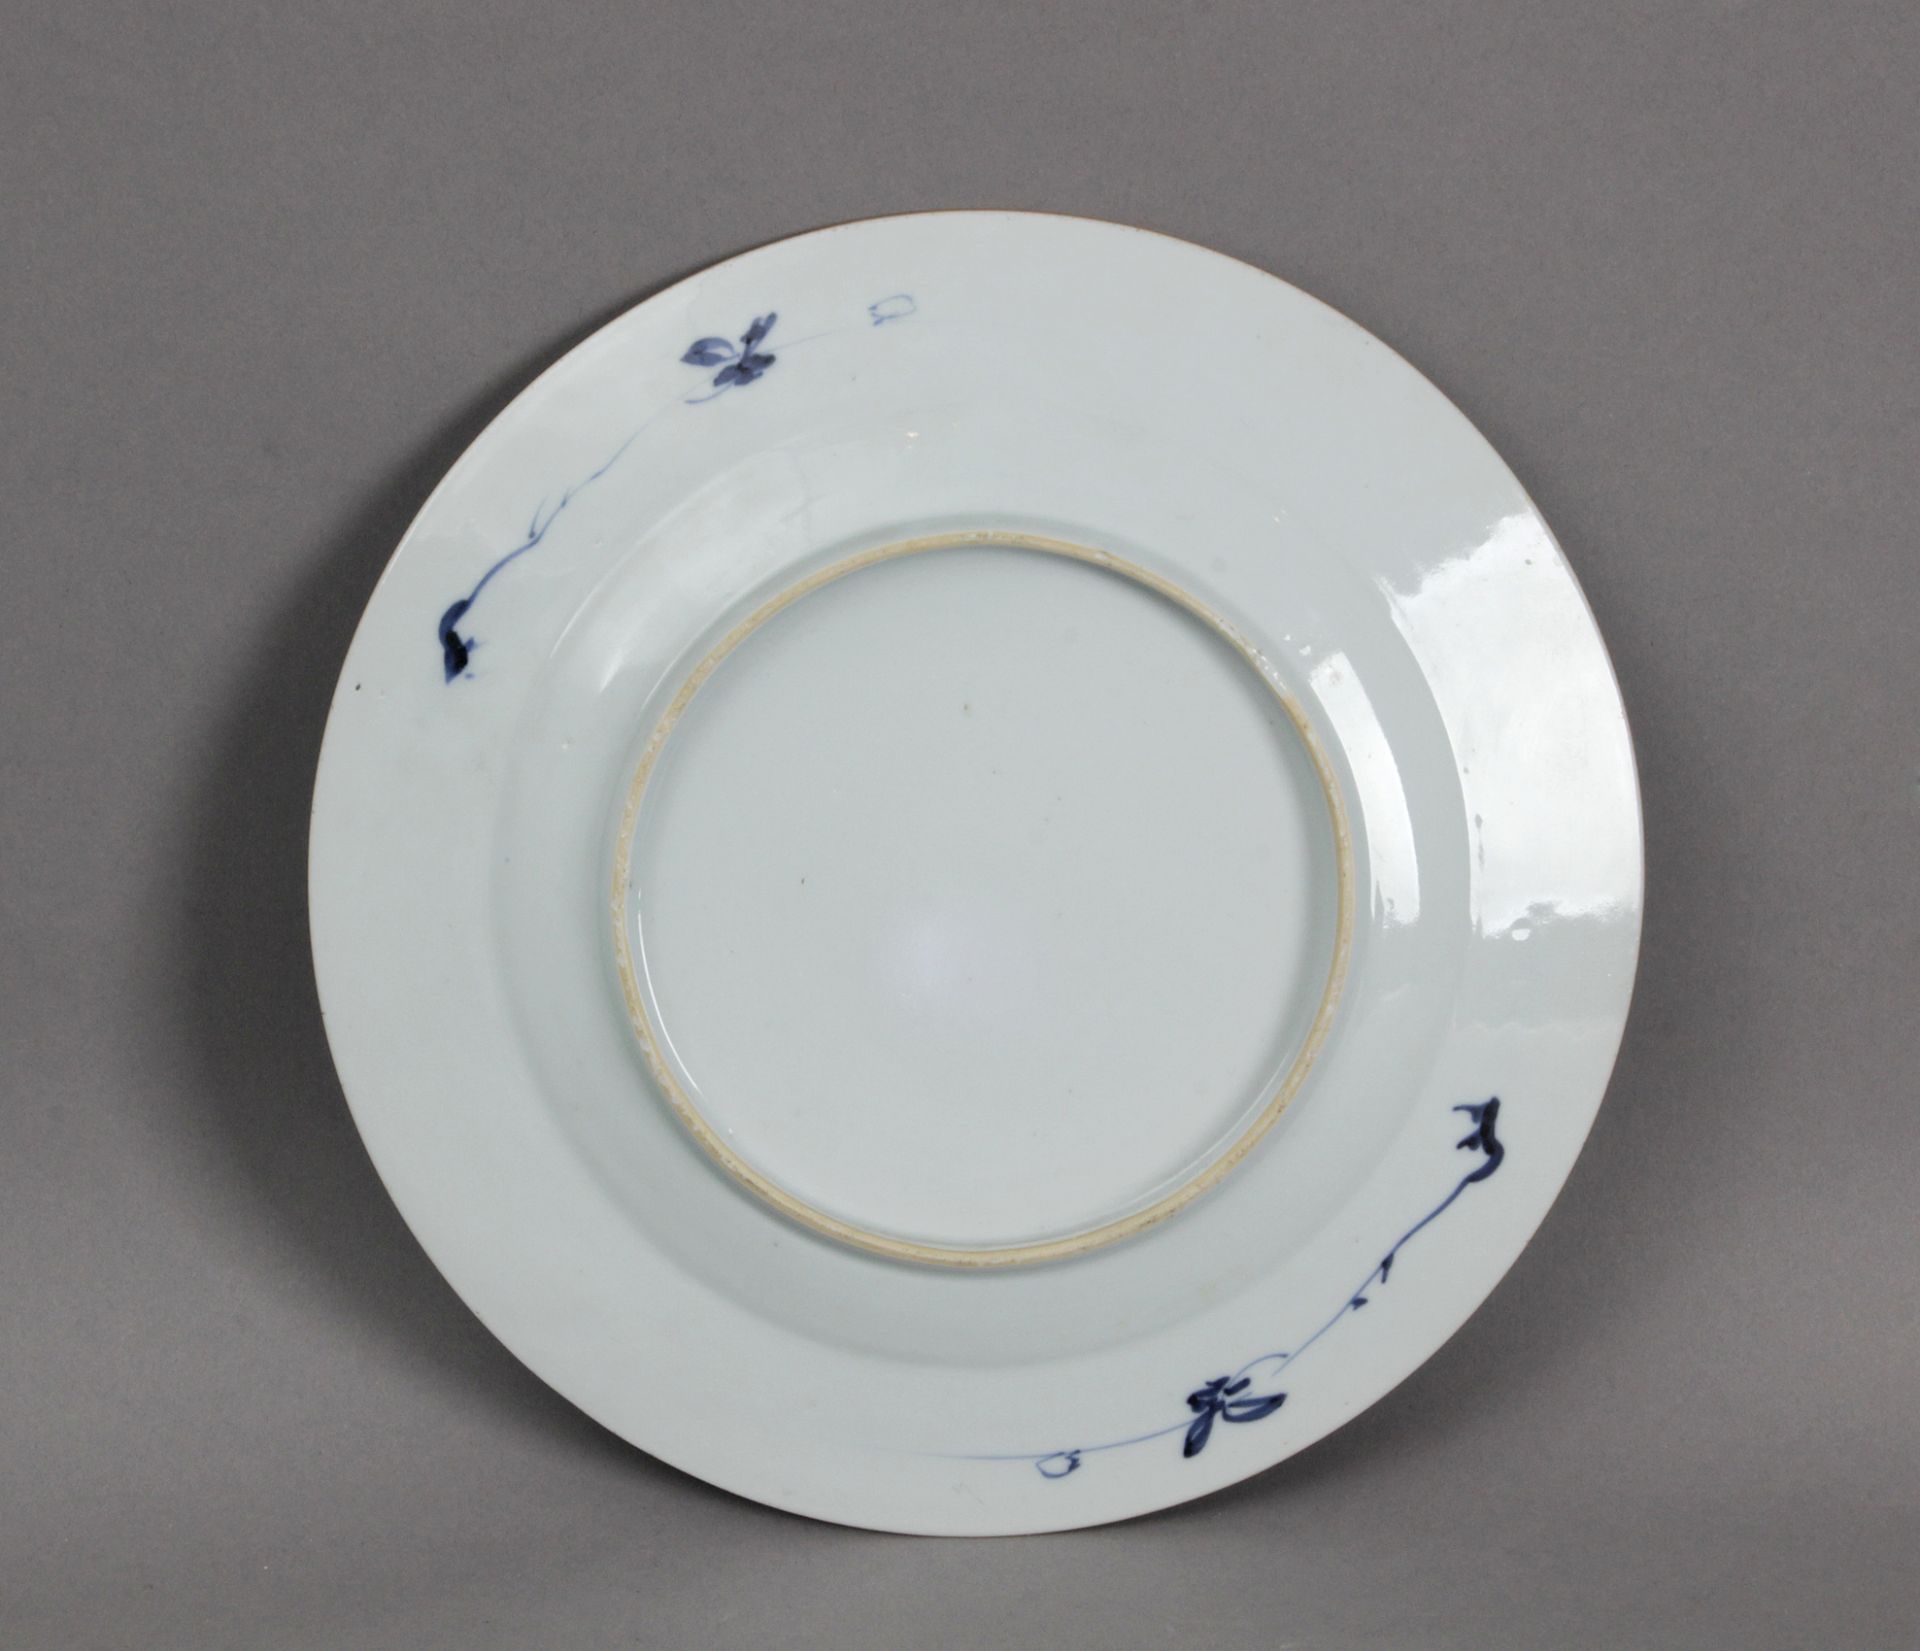 A 19th century Chinese Qing dynasty porcelain plate - Image 2 of 2